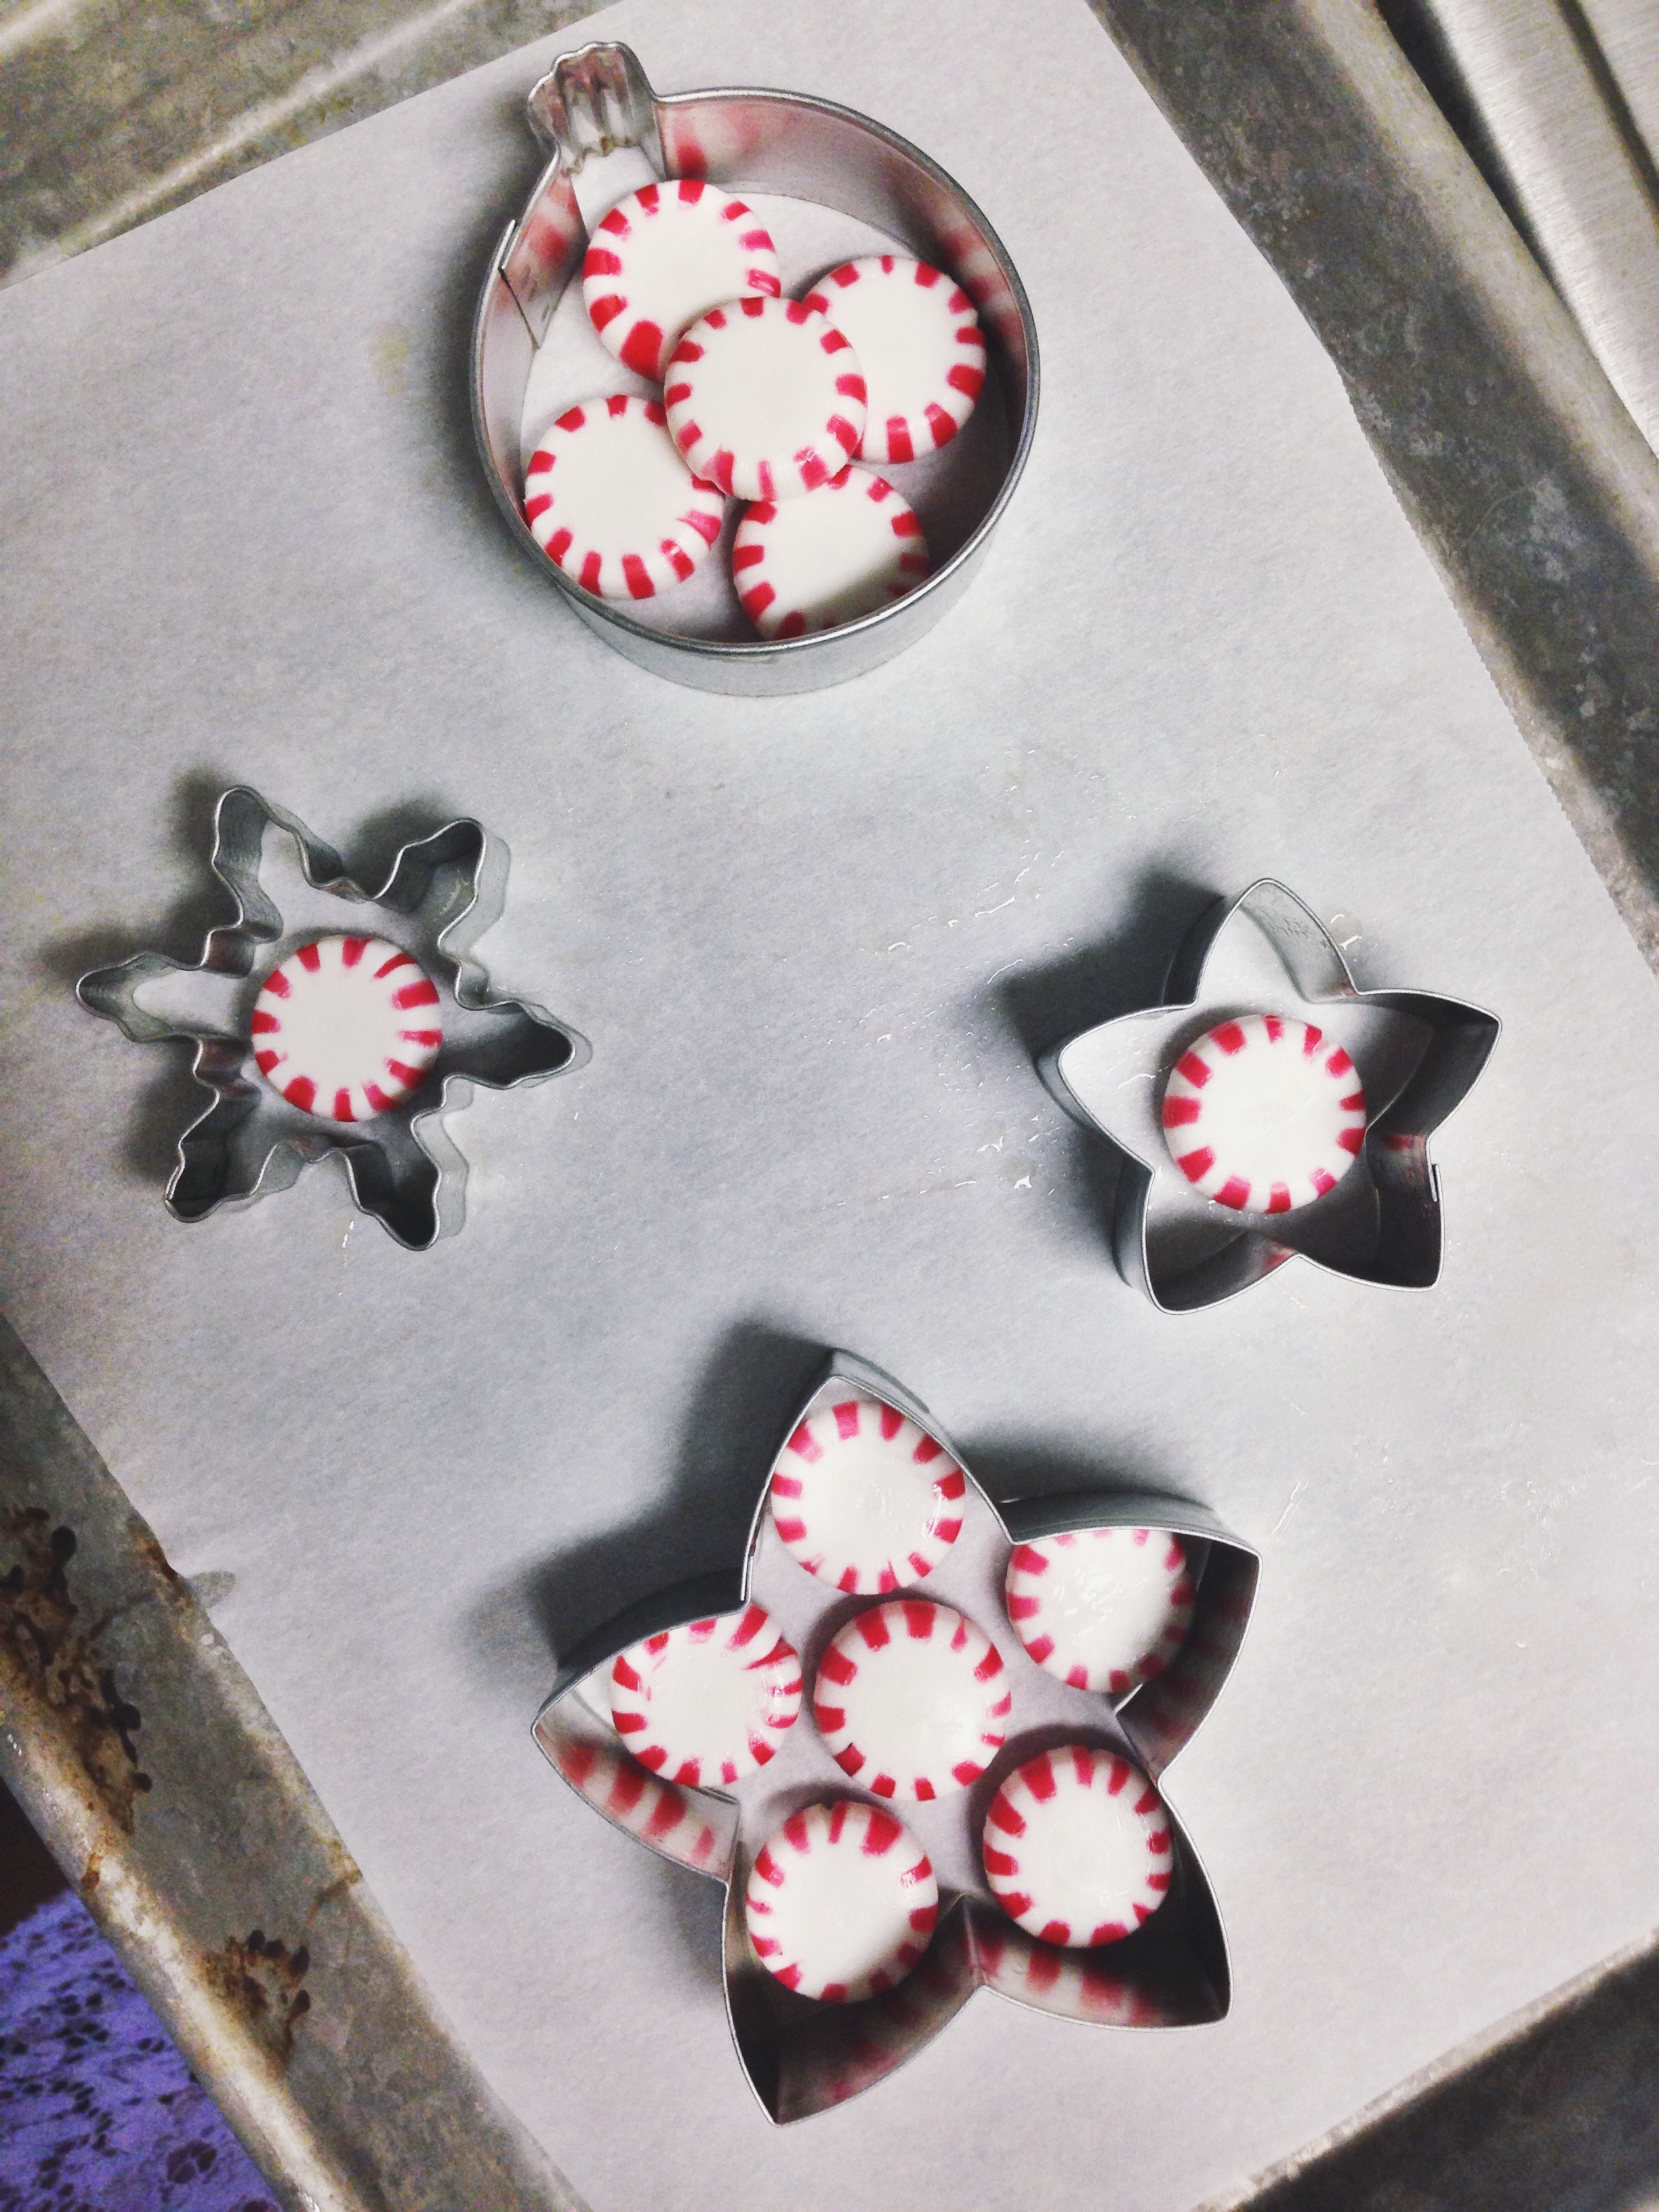 Candy Christmas Ornaments To Make
 Peppermint Candy Christmas Ornaments